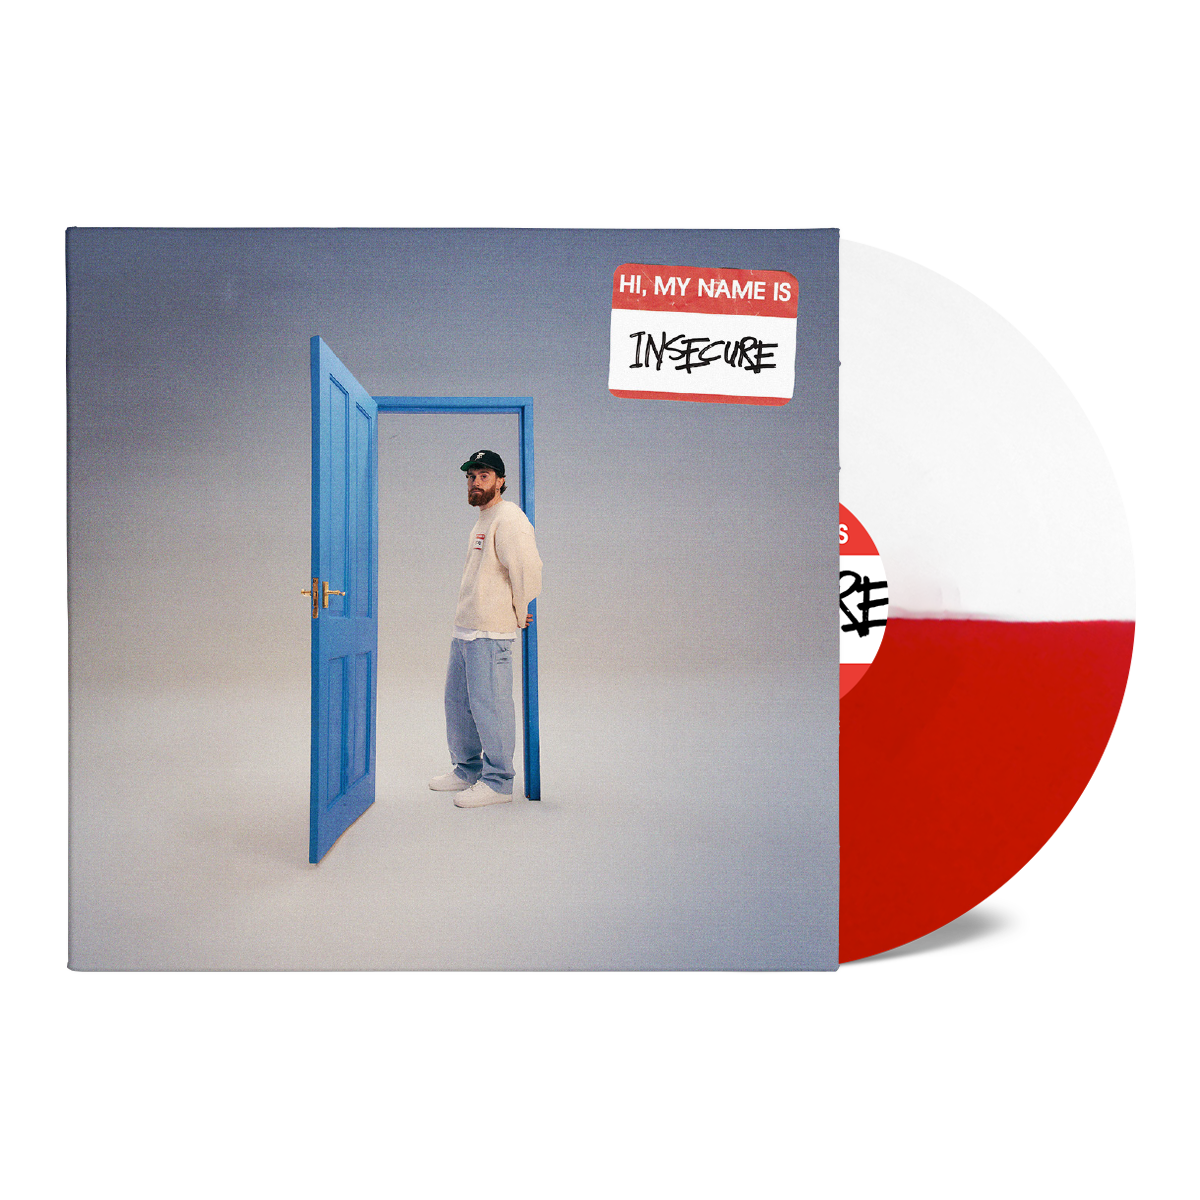 hi, my name is insecure: Limited Red/White Split Vinyl LP, CD + Signed Art Card